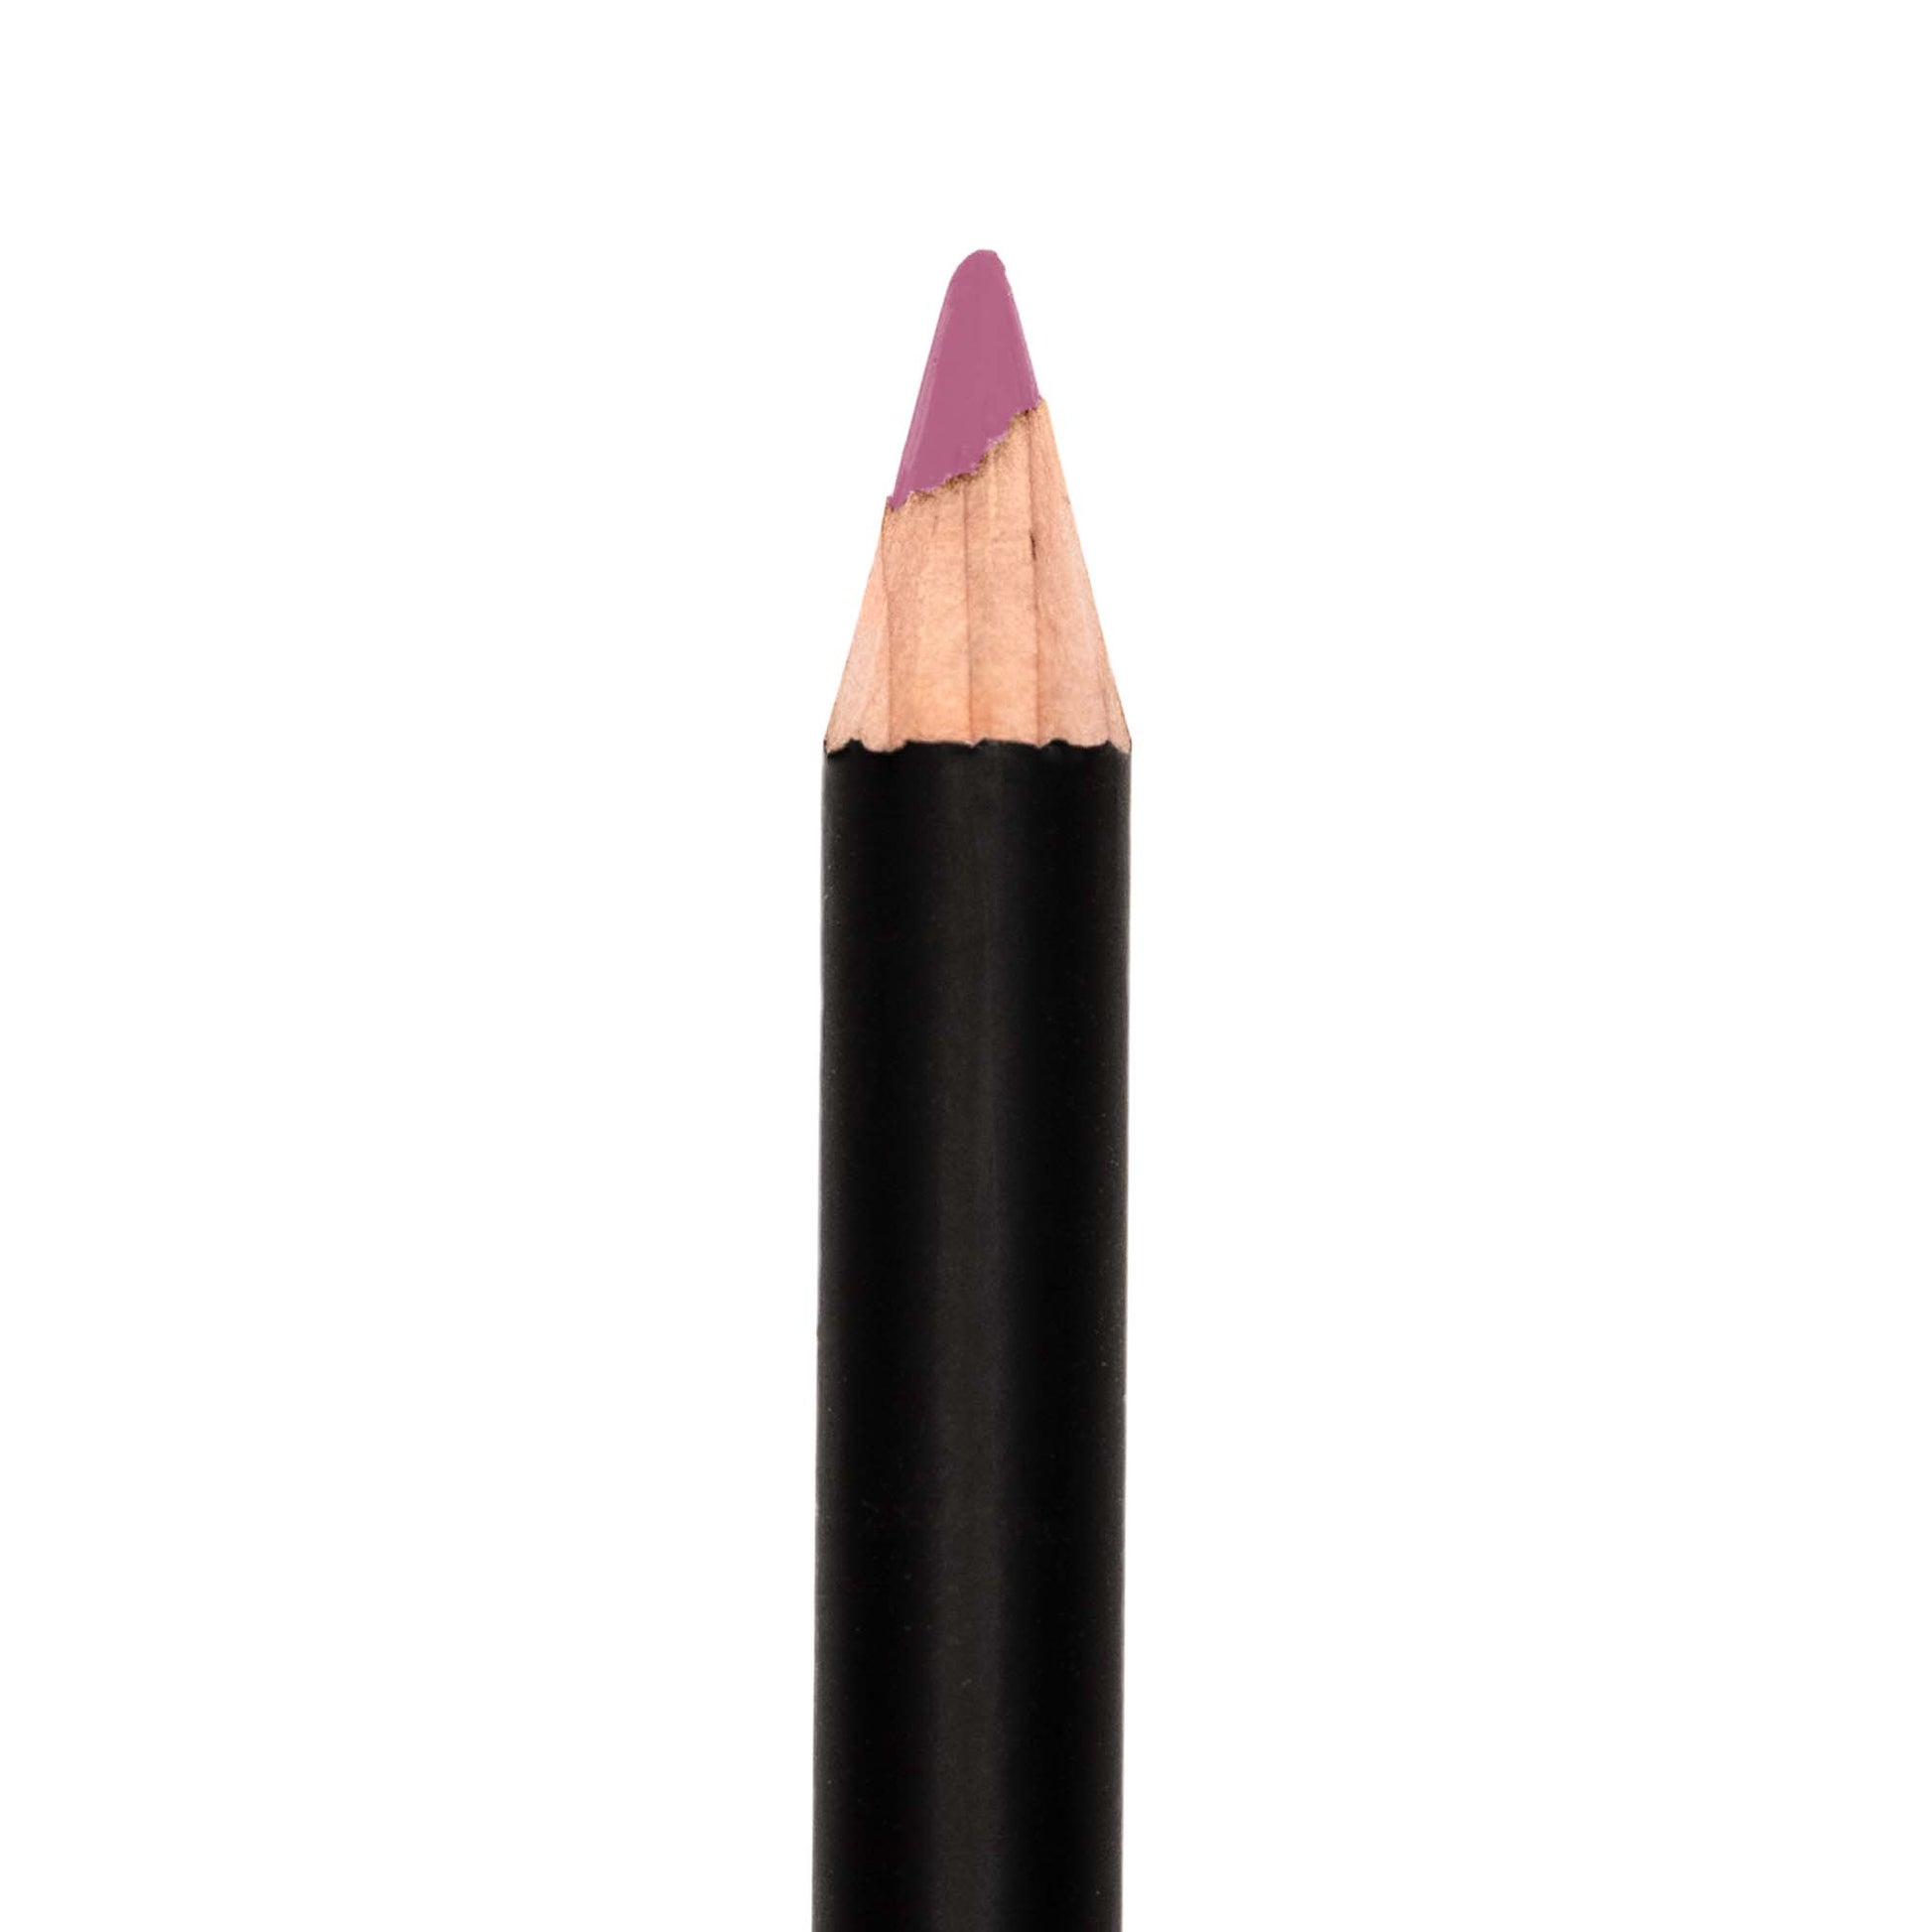 Experience the benefits of Cruisin Organics Sand Lip Pencil, the ideal addition to your beach beauty routine. This SPF-infused lip pencil offers both sun protection and a flawless, natural appearance while you bask in the sun on the sandy coast. Expertly designed for a cruelty-free application that prioritizes protection.